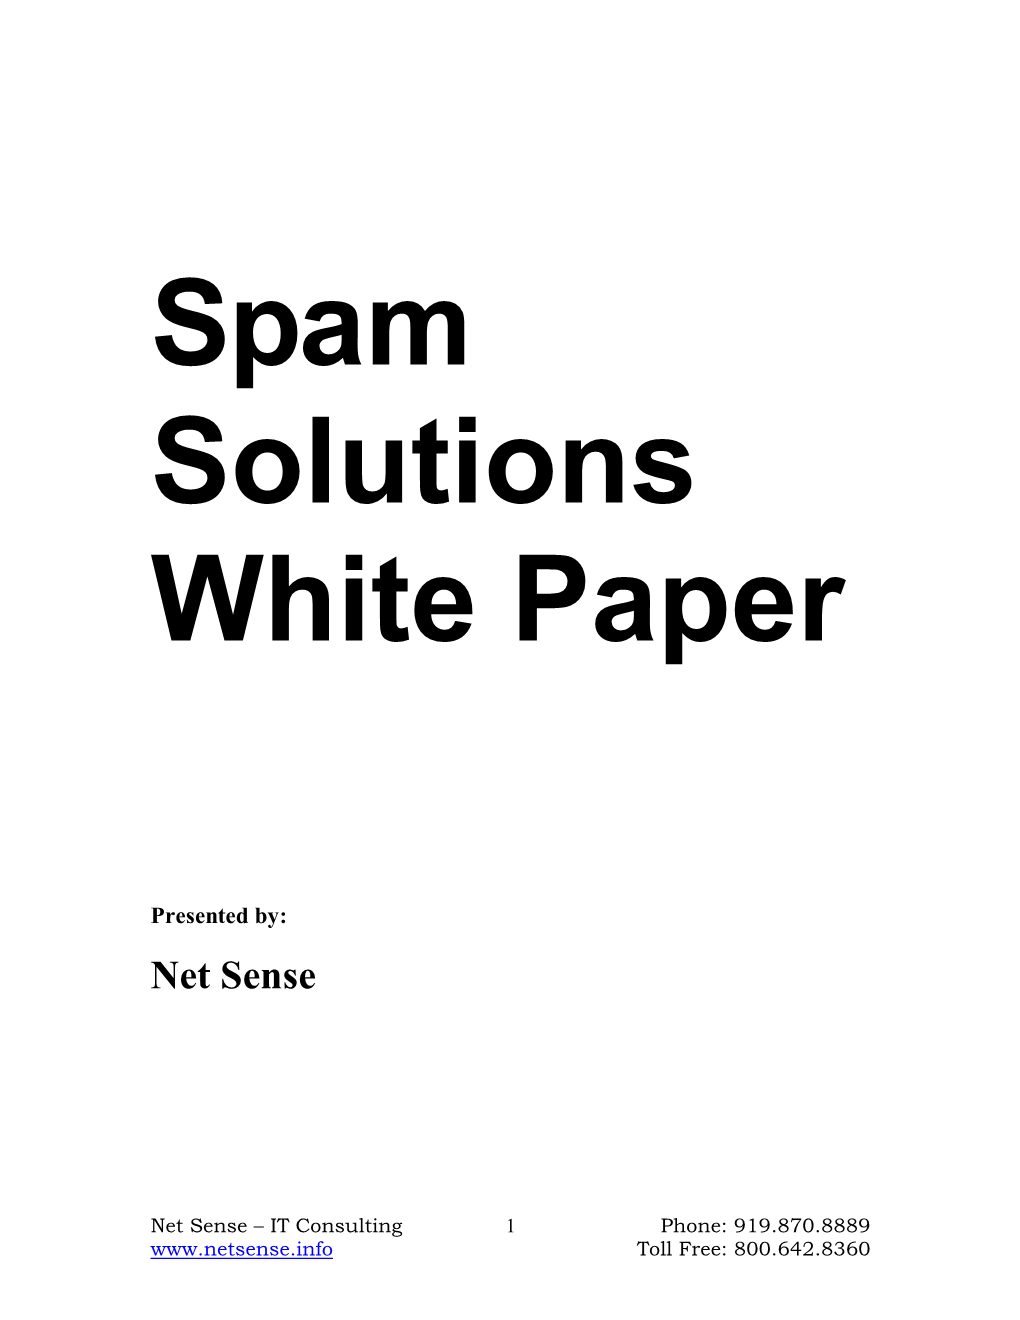 Spam Solutions White Paper